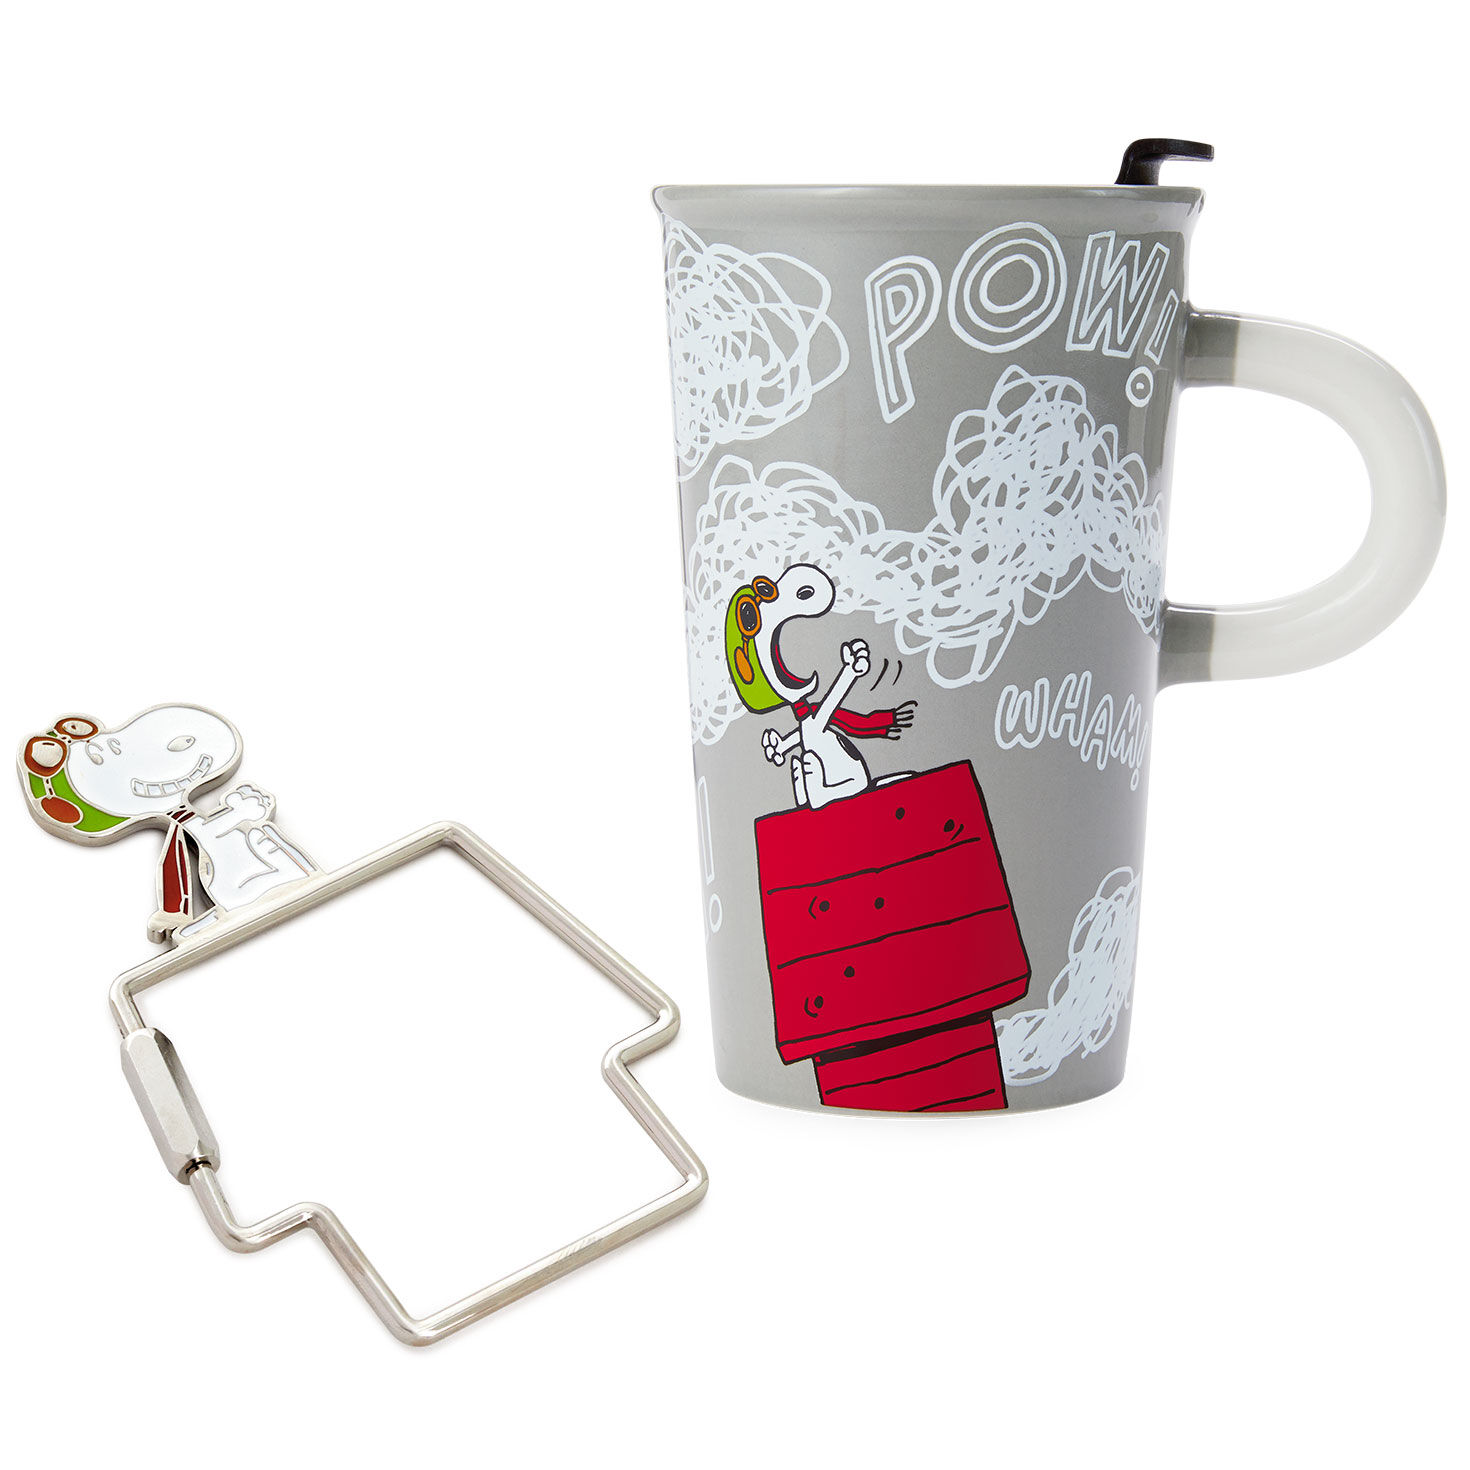 Peanuts® Snoopy Flying Ace On-the-Go Gift Set for only USD 9.99-24.99 | Hallmark